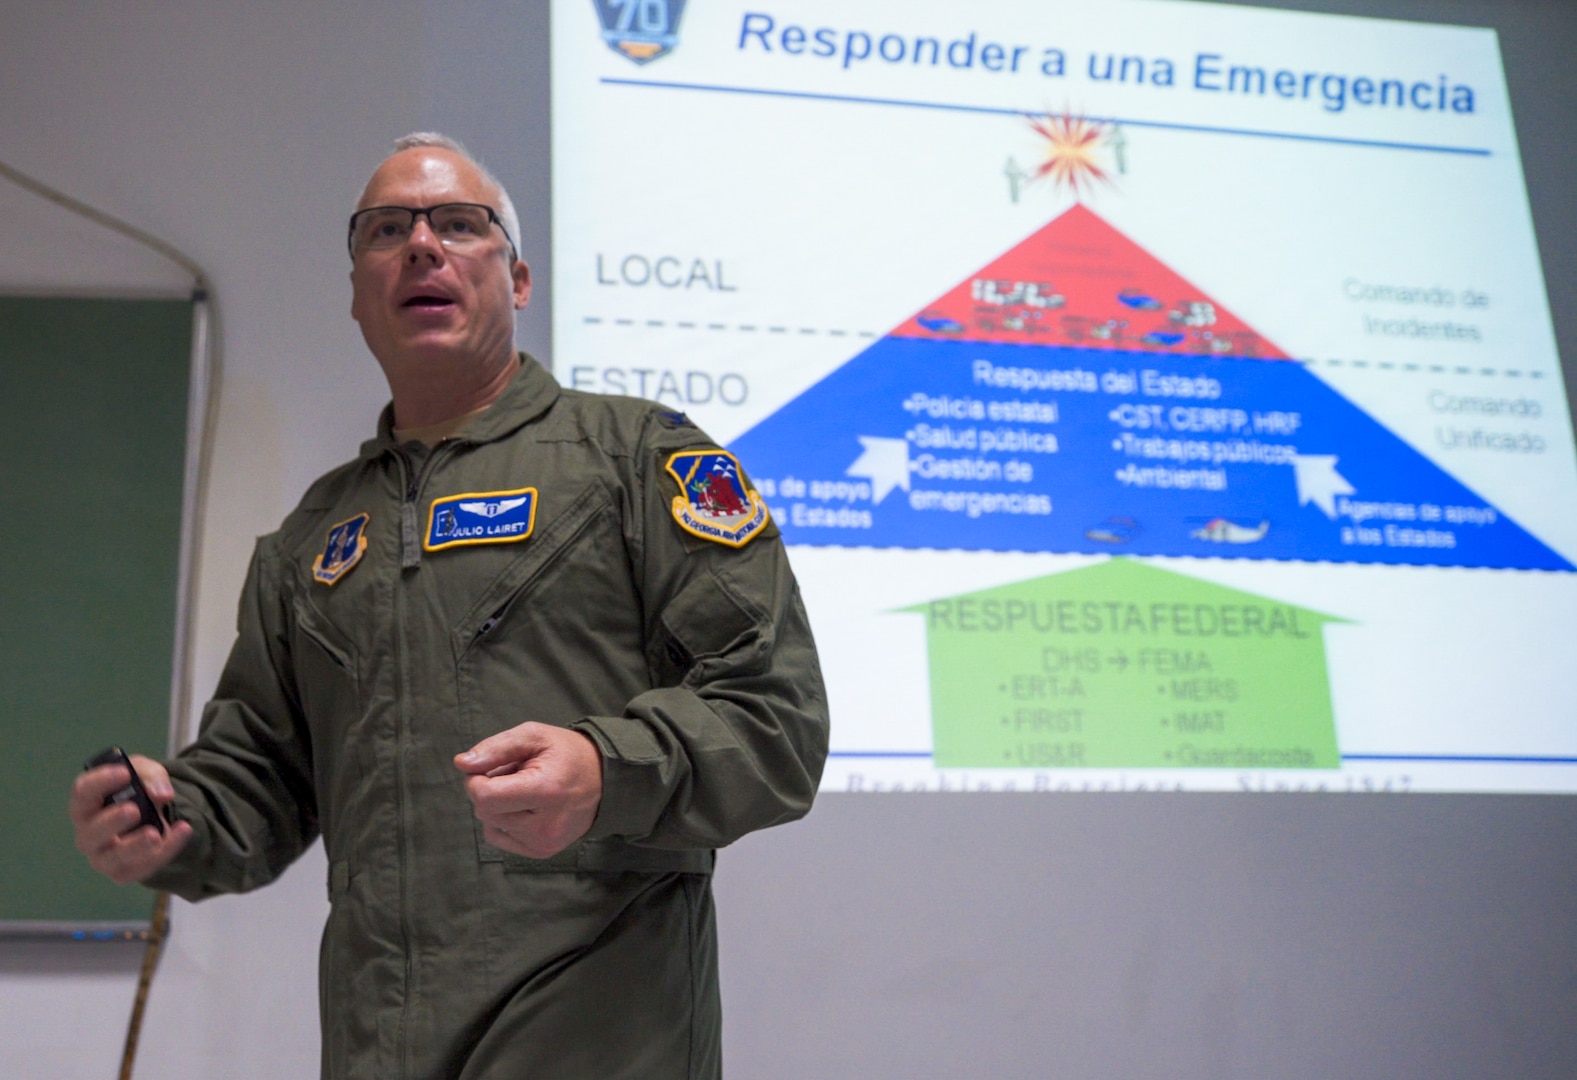 U.S. Air Force Col. Julio Lairet, Georgia Air National Guard State Air Surgeon, leads an emergency response briefing during a senior leader engagement as part of the Department of Defense State Partnership Program Sep. 20 at the National Institute of Aeronautical and Space Medicine, Argentina.